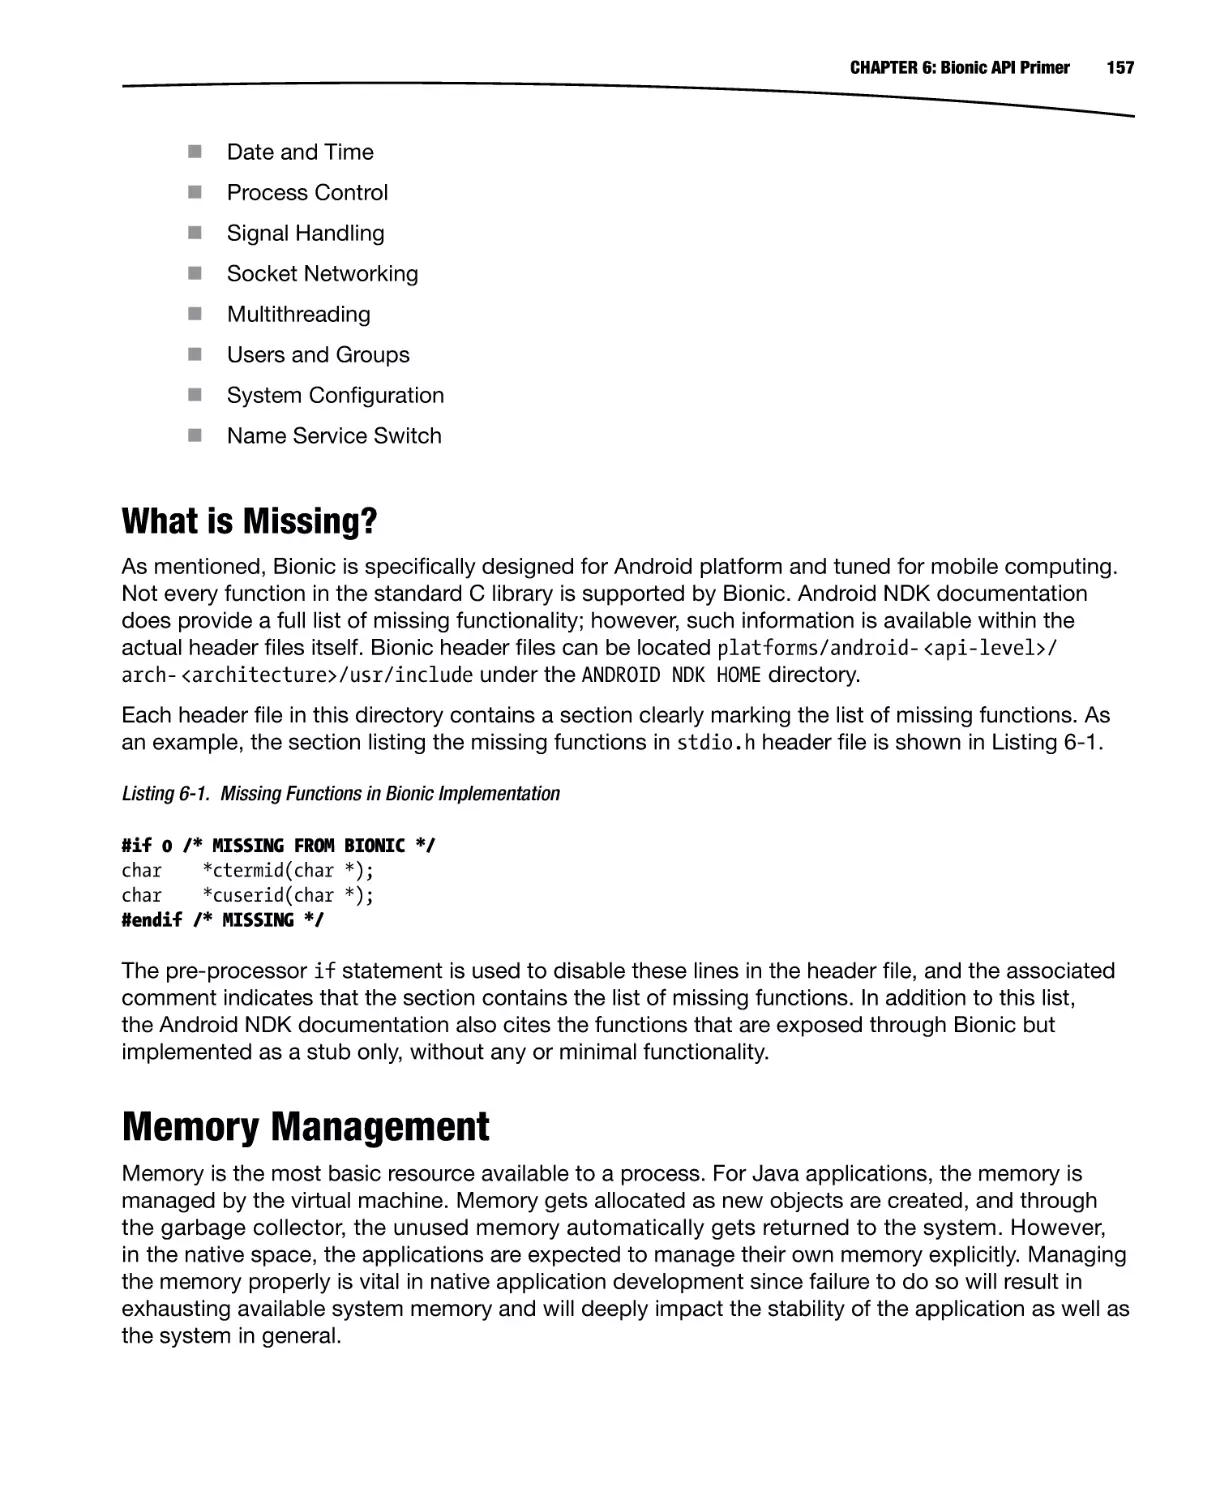 What is Missing?
Memory Management